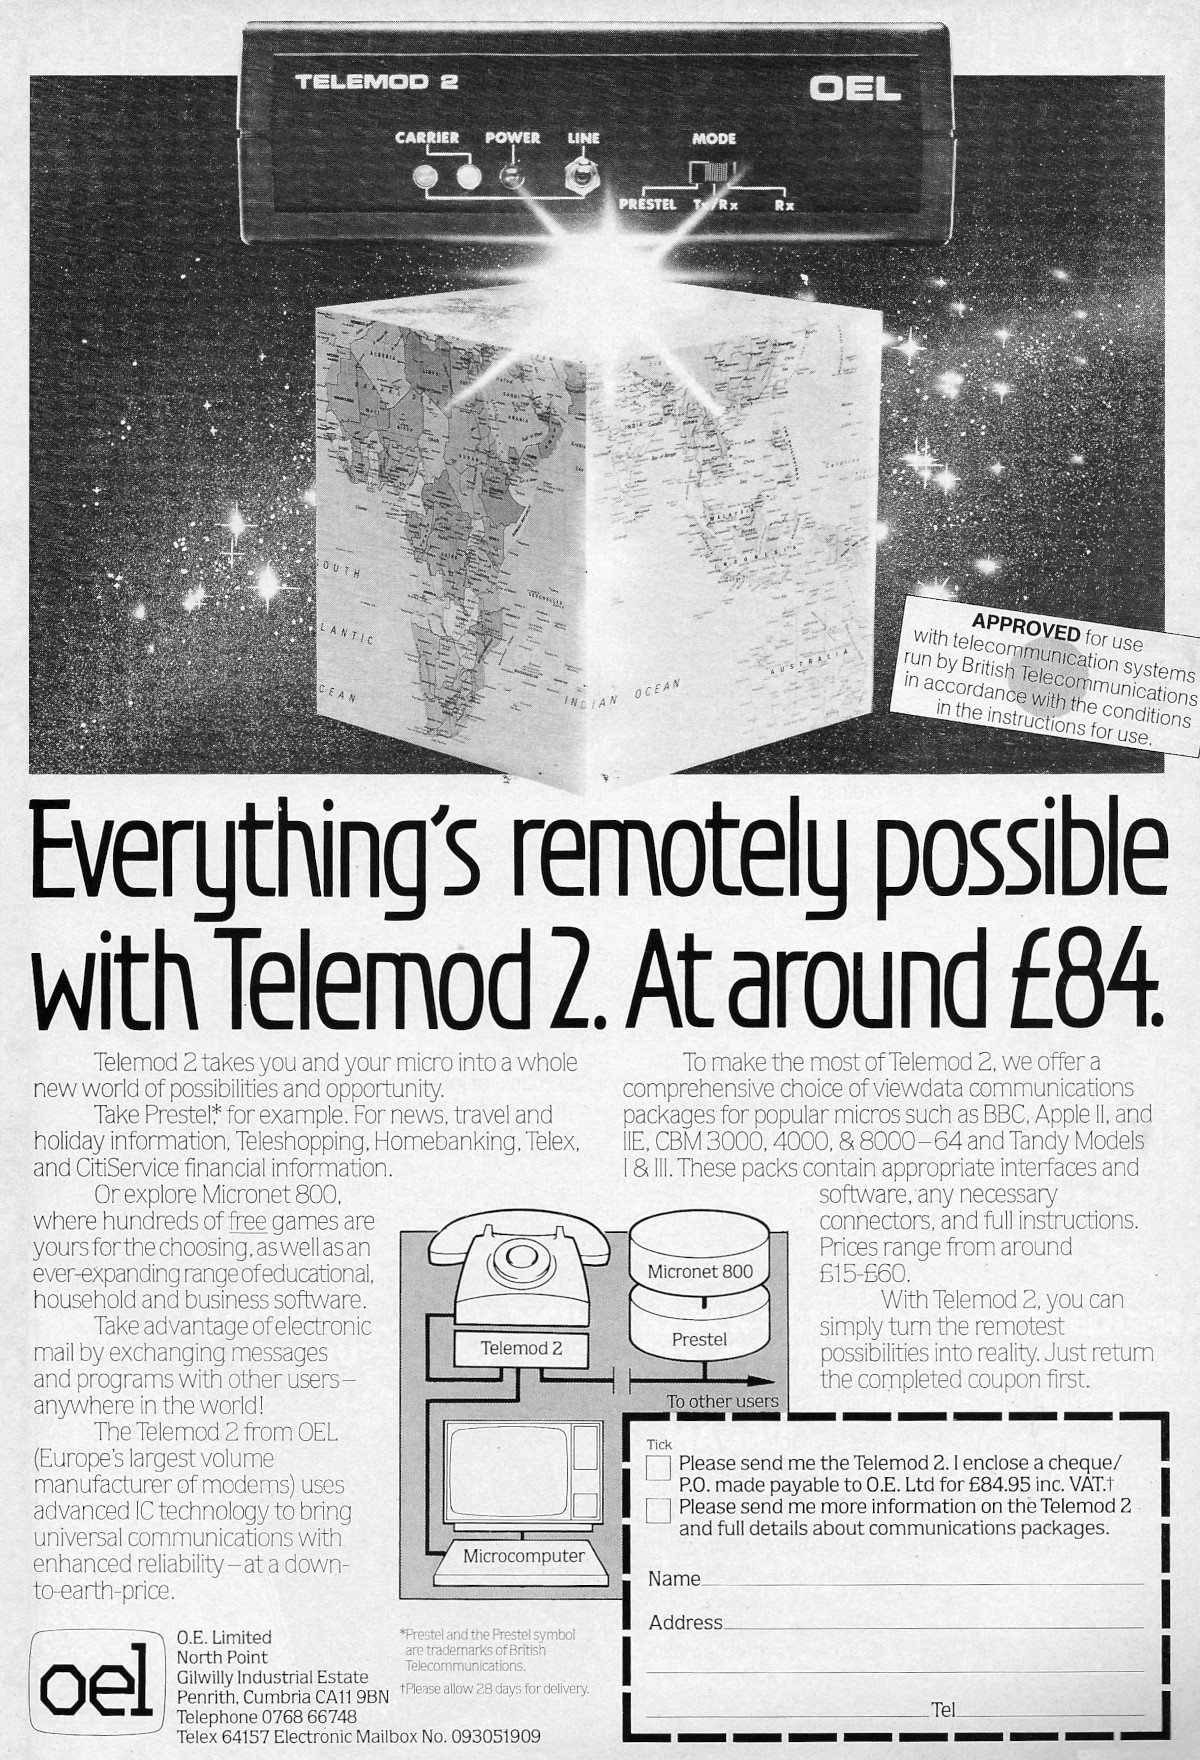 The Telemod 2 modem from OEL of Penrith, Cumbria - quite a bargain at only £84, or about £310 in 2024. Software and interfaces were extra though, with prices from £15 - £60